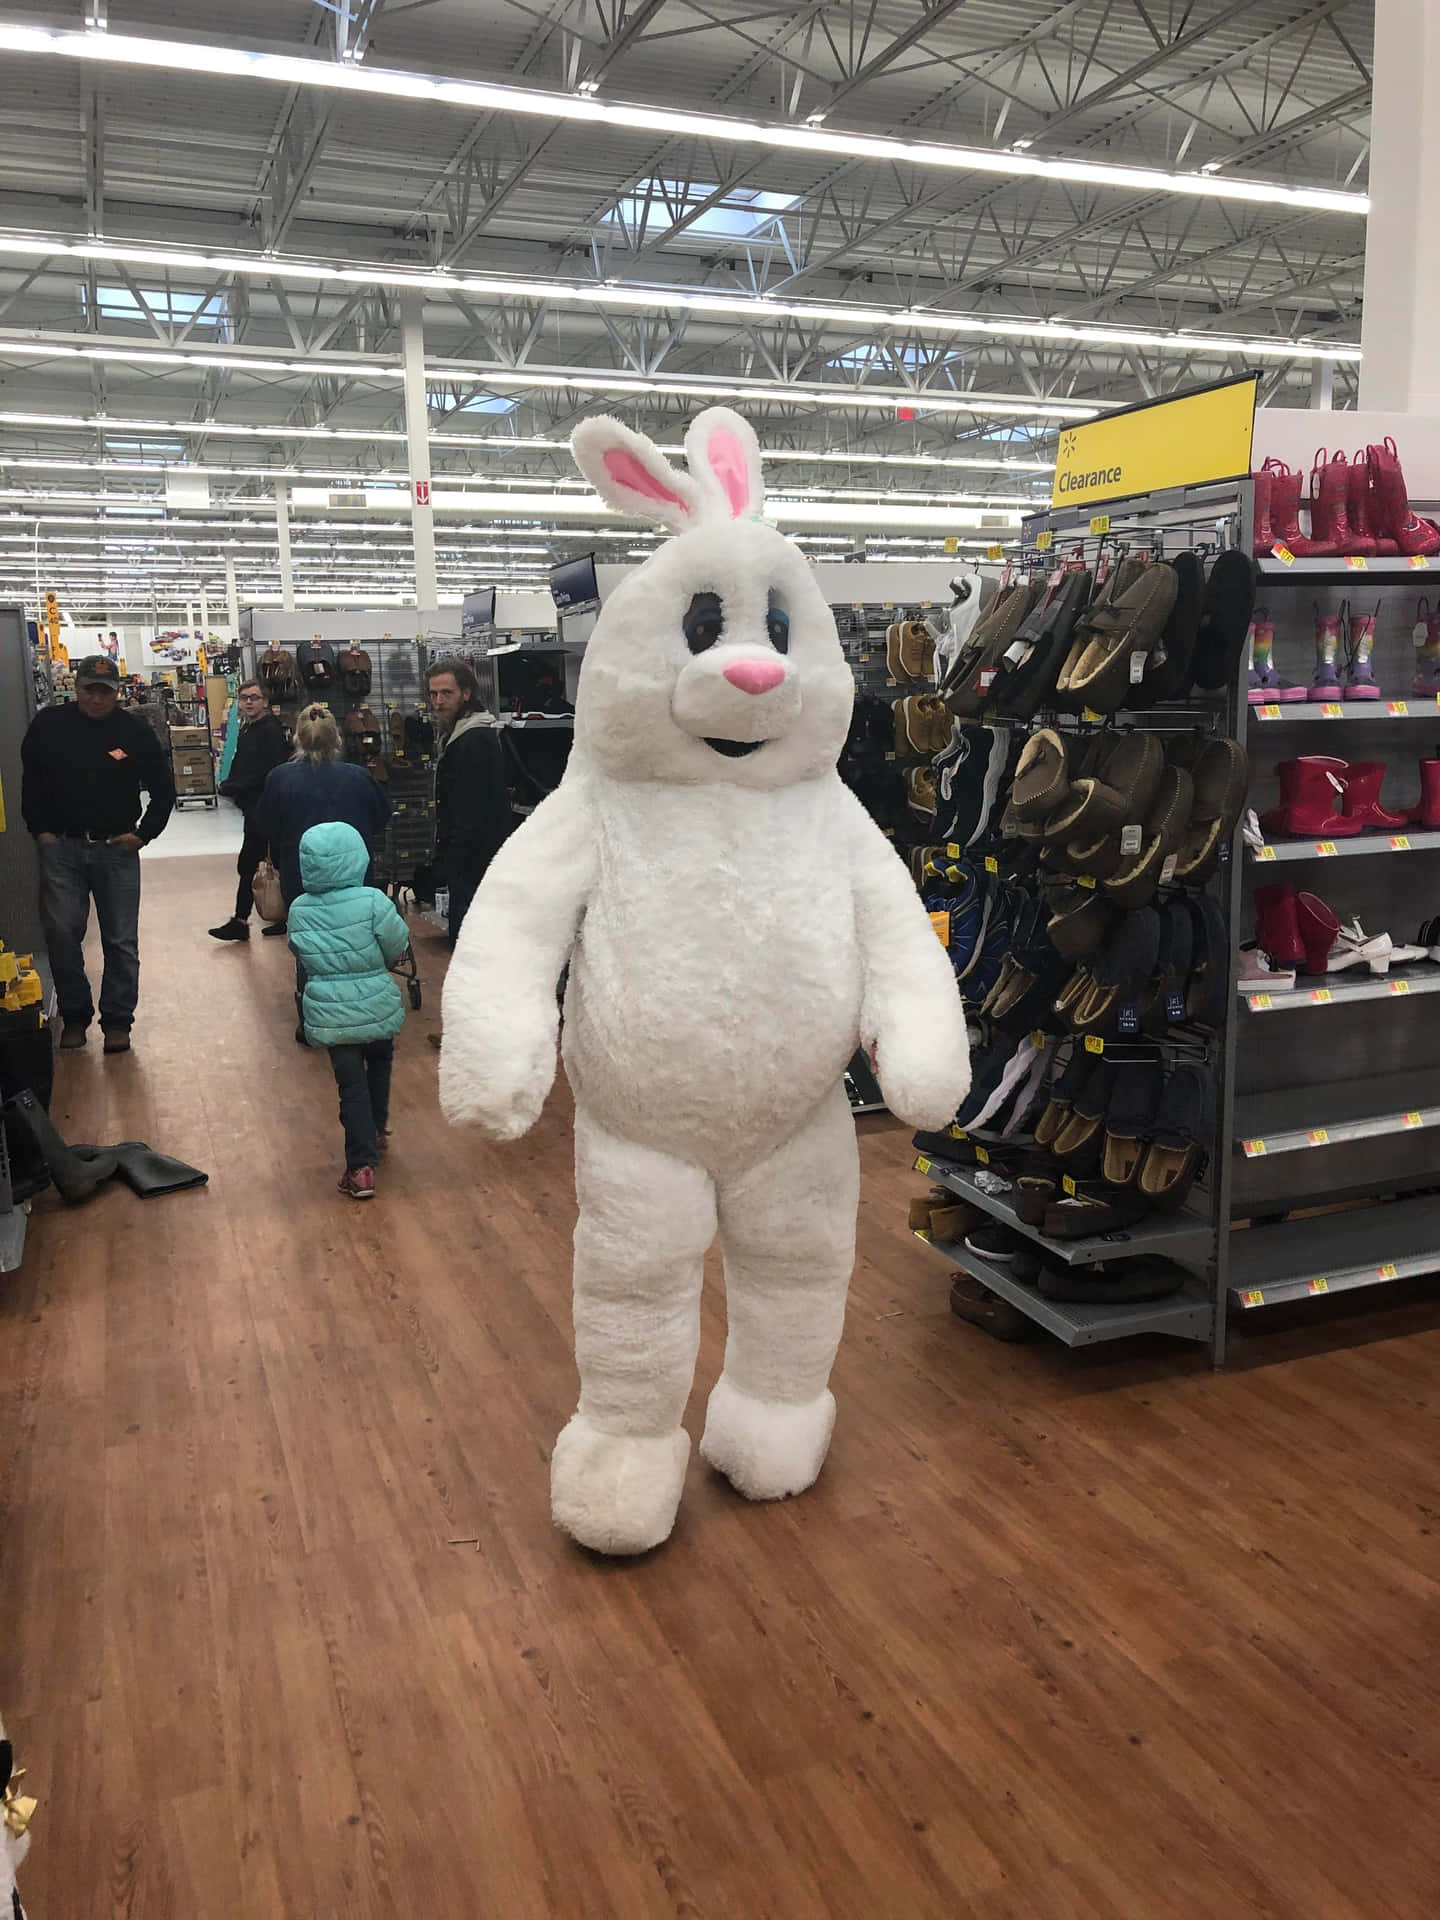 Nothing Says Easter Like a Creepy Easter Bunny